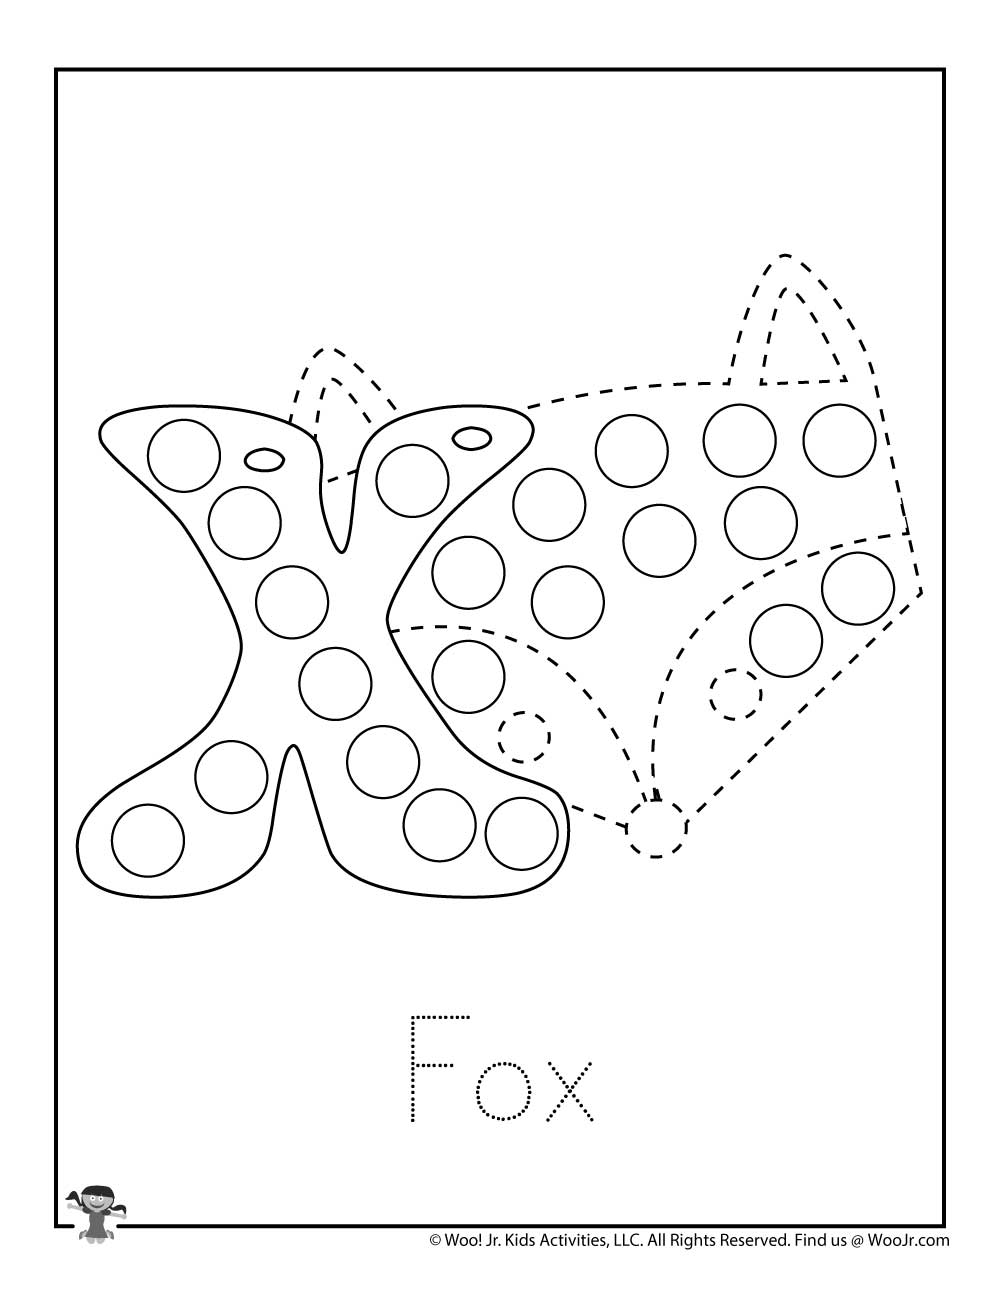 Letter X Dot Marker Coloring Page for Kids | Woo! Jr. Kids Activities :  Children's Publishing